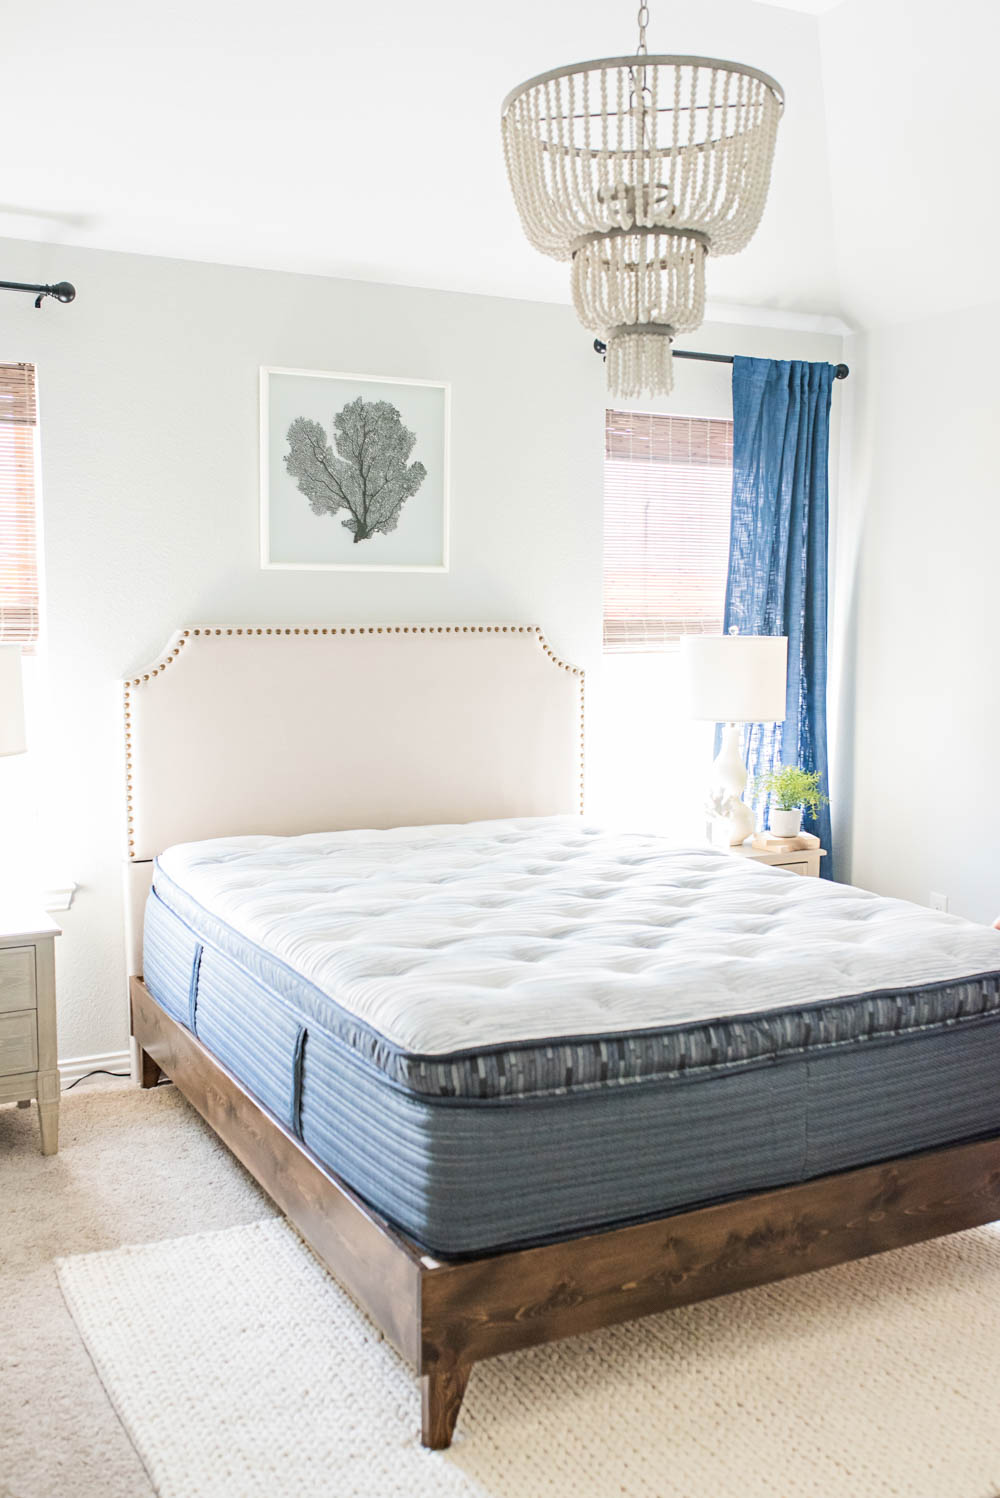 Update your bedroom with comfort in mind with Sears. #ad #sears #bedroomideas 